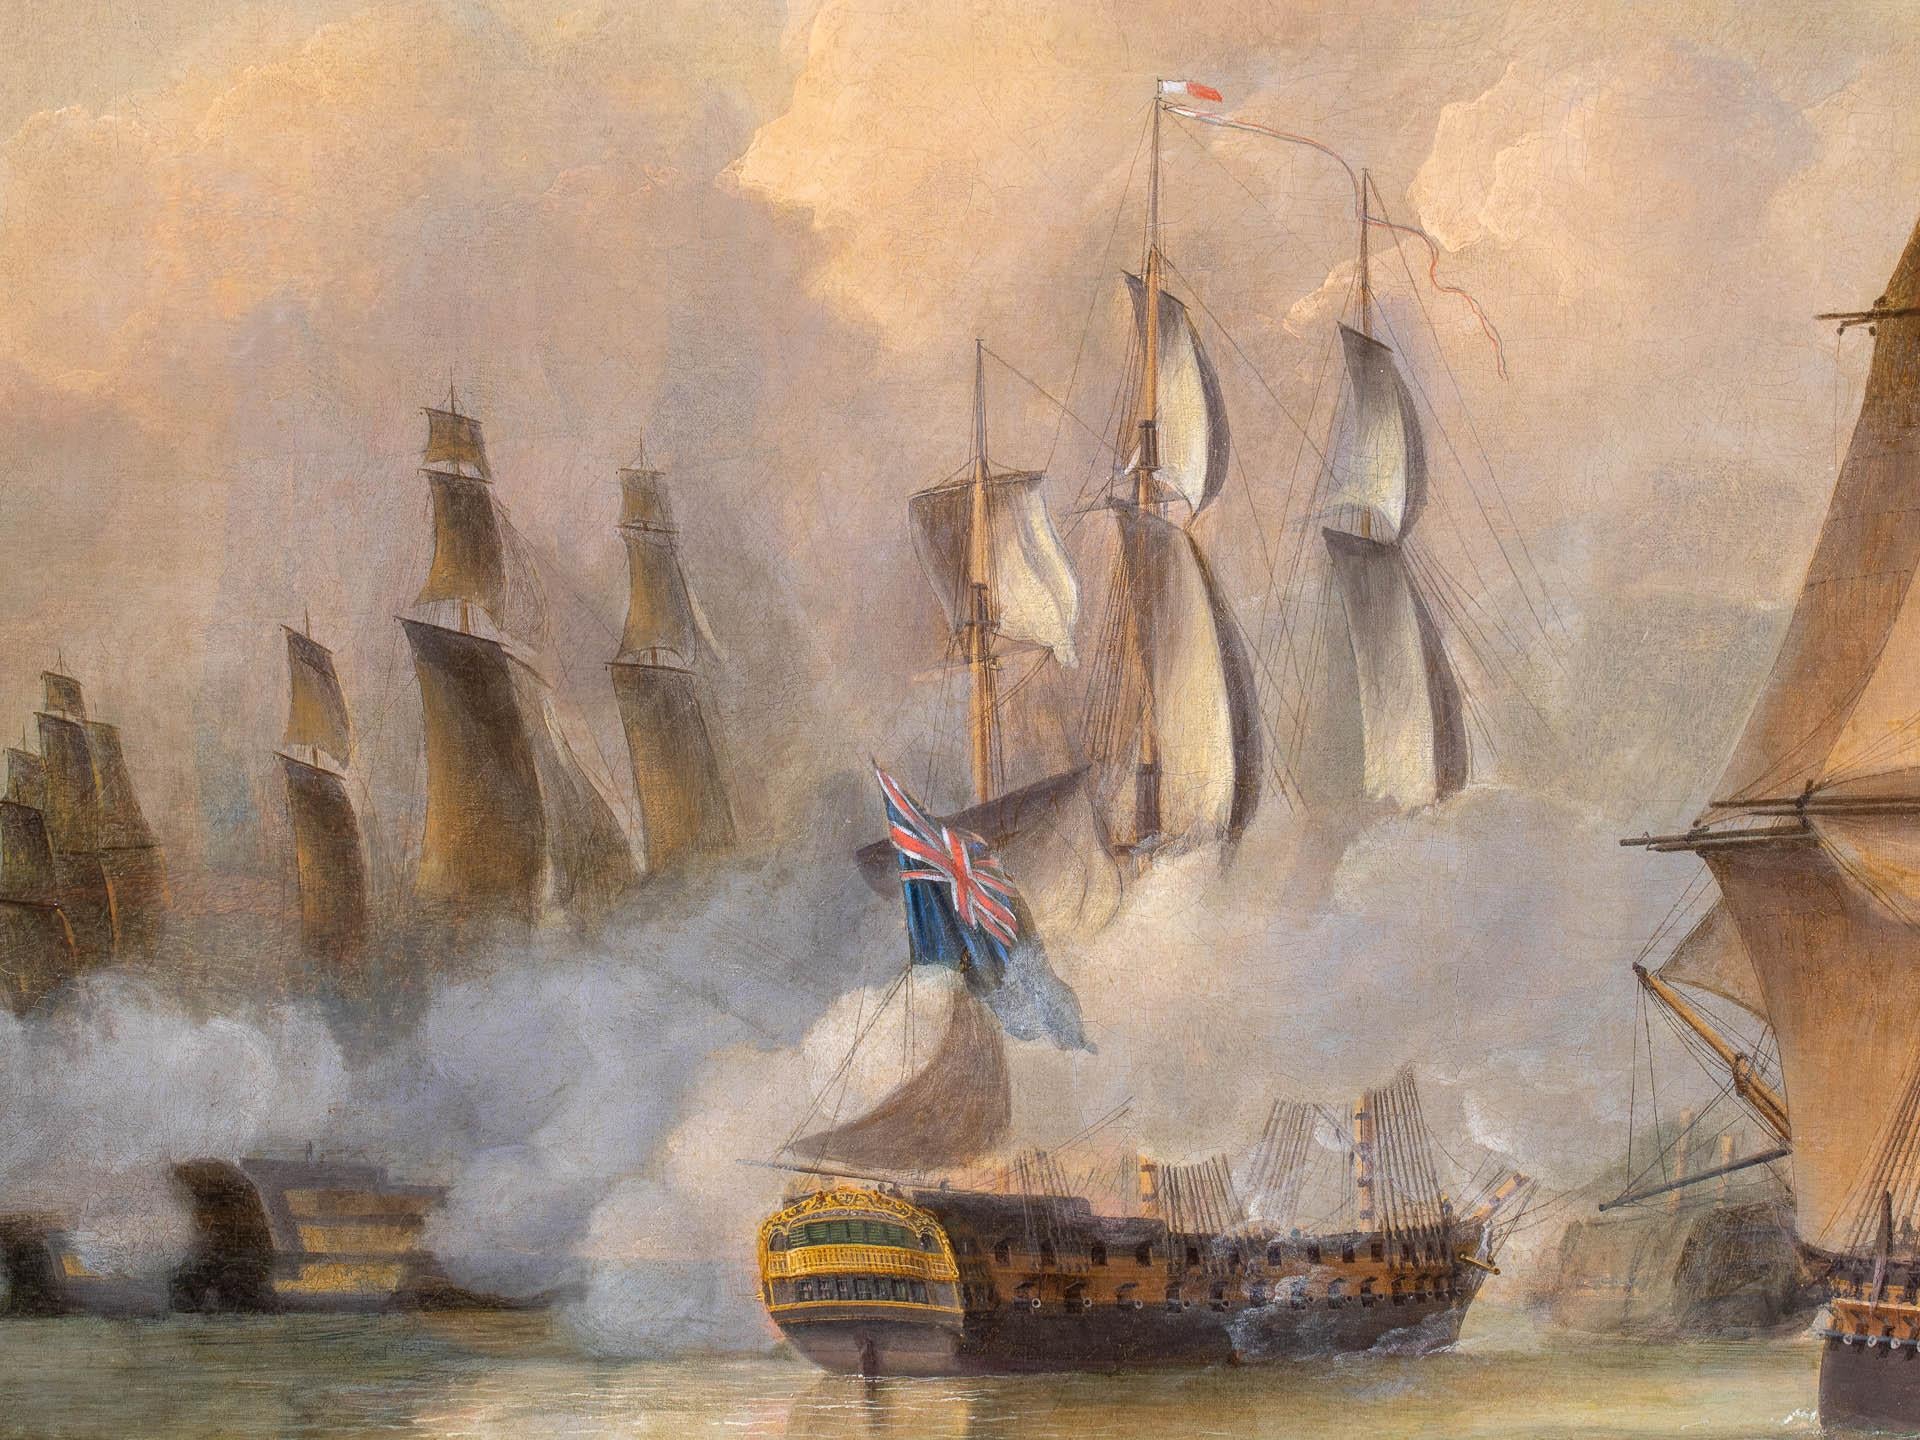 This large and epic battle scene commemorates one of the most unusual actions of the Napoleonic Wars. The British Honourable East India Company’s China Fleet of merchant vessels left Canton in early 1804 commanded by Commodore Nathaniel Dance. On 11